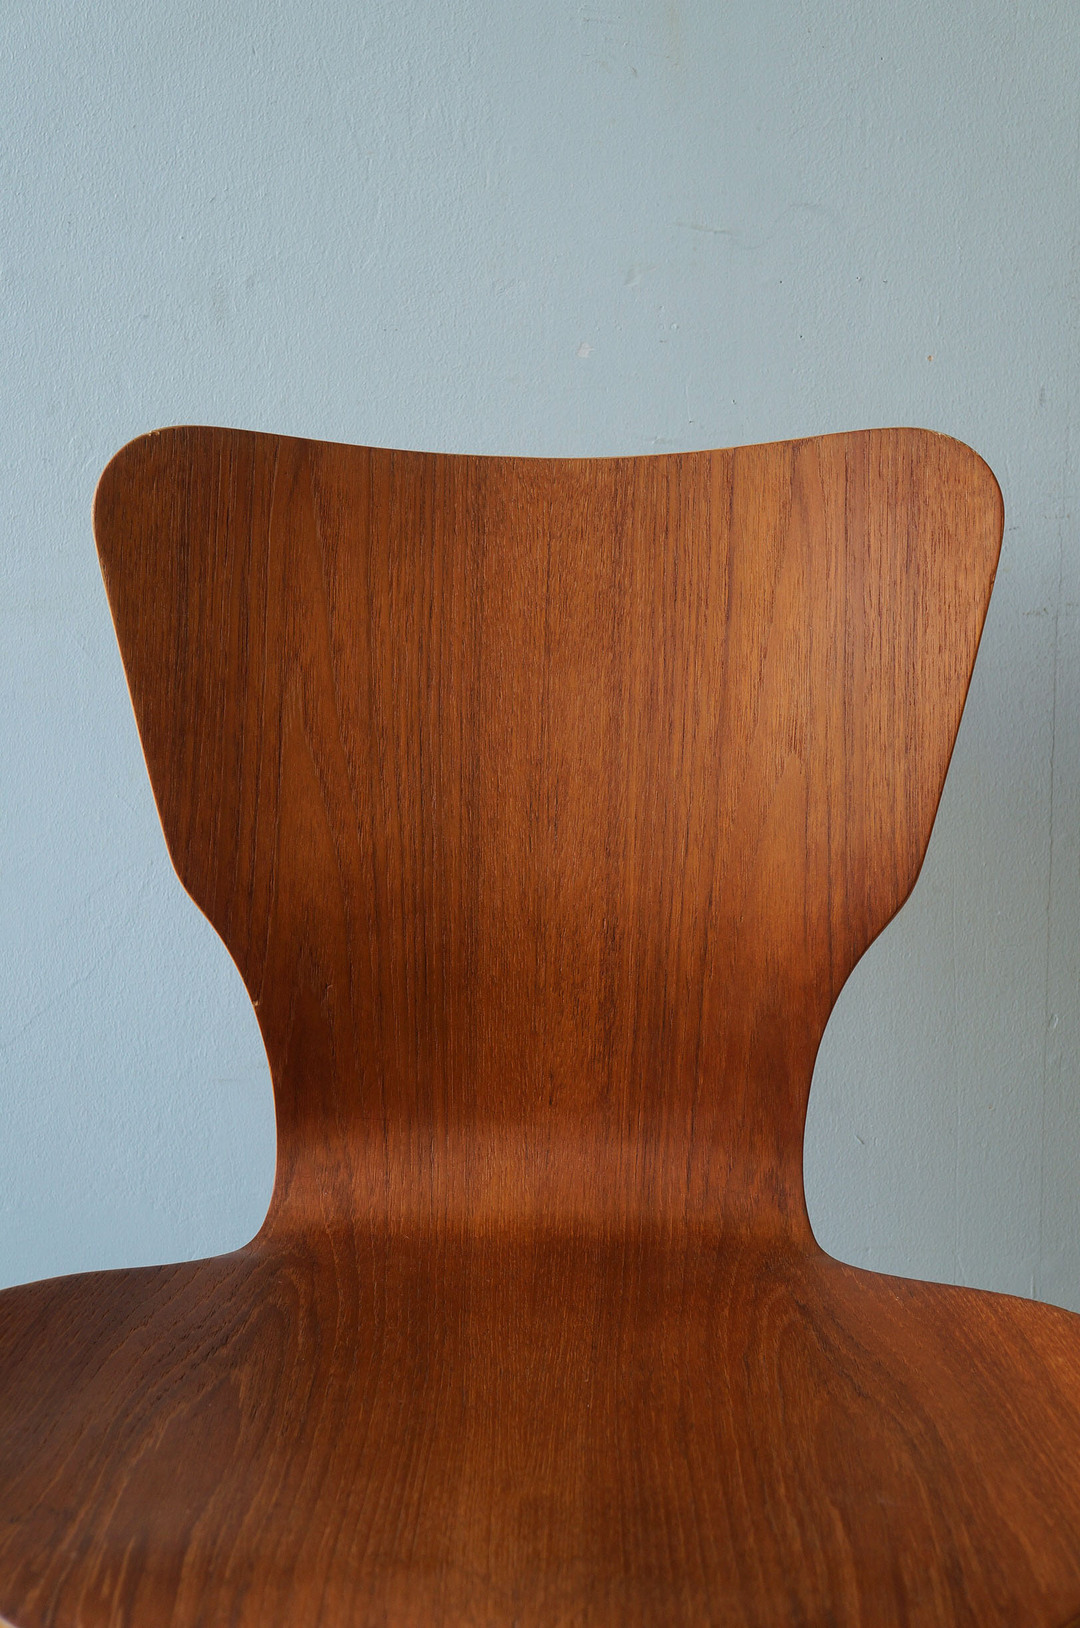 Danish Vintage Teak Plywood Stacking Chair MH Stålmøbler/デンマークヴィンテージ スタッキングチェア チーク材 プライウッド 椅子 ミッドセンチュリー モダン 北欧家具 1